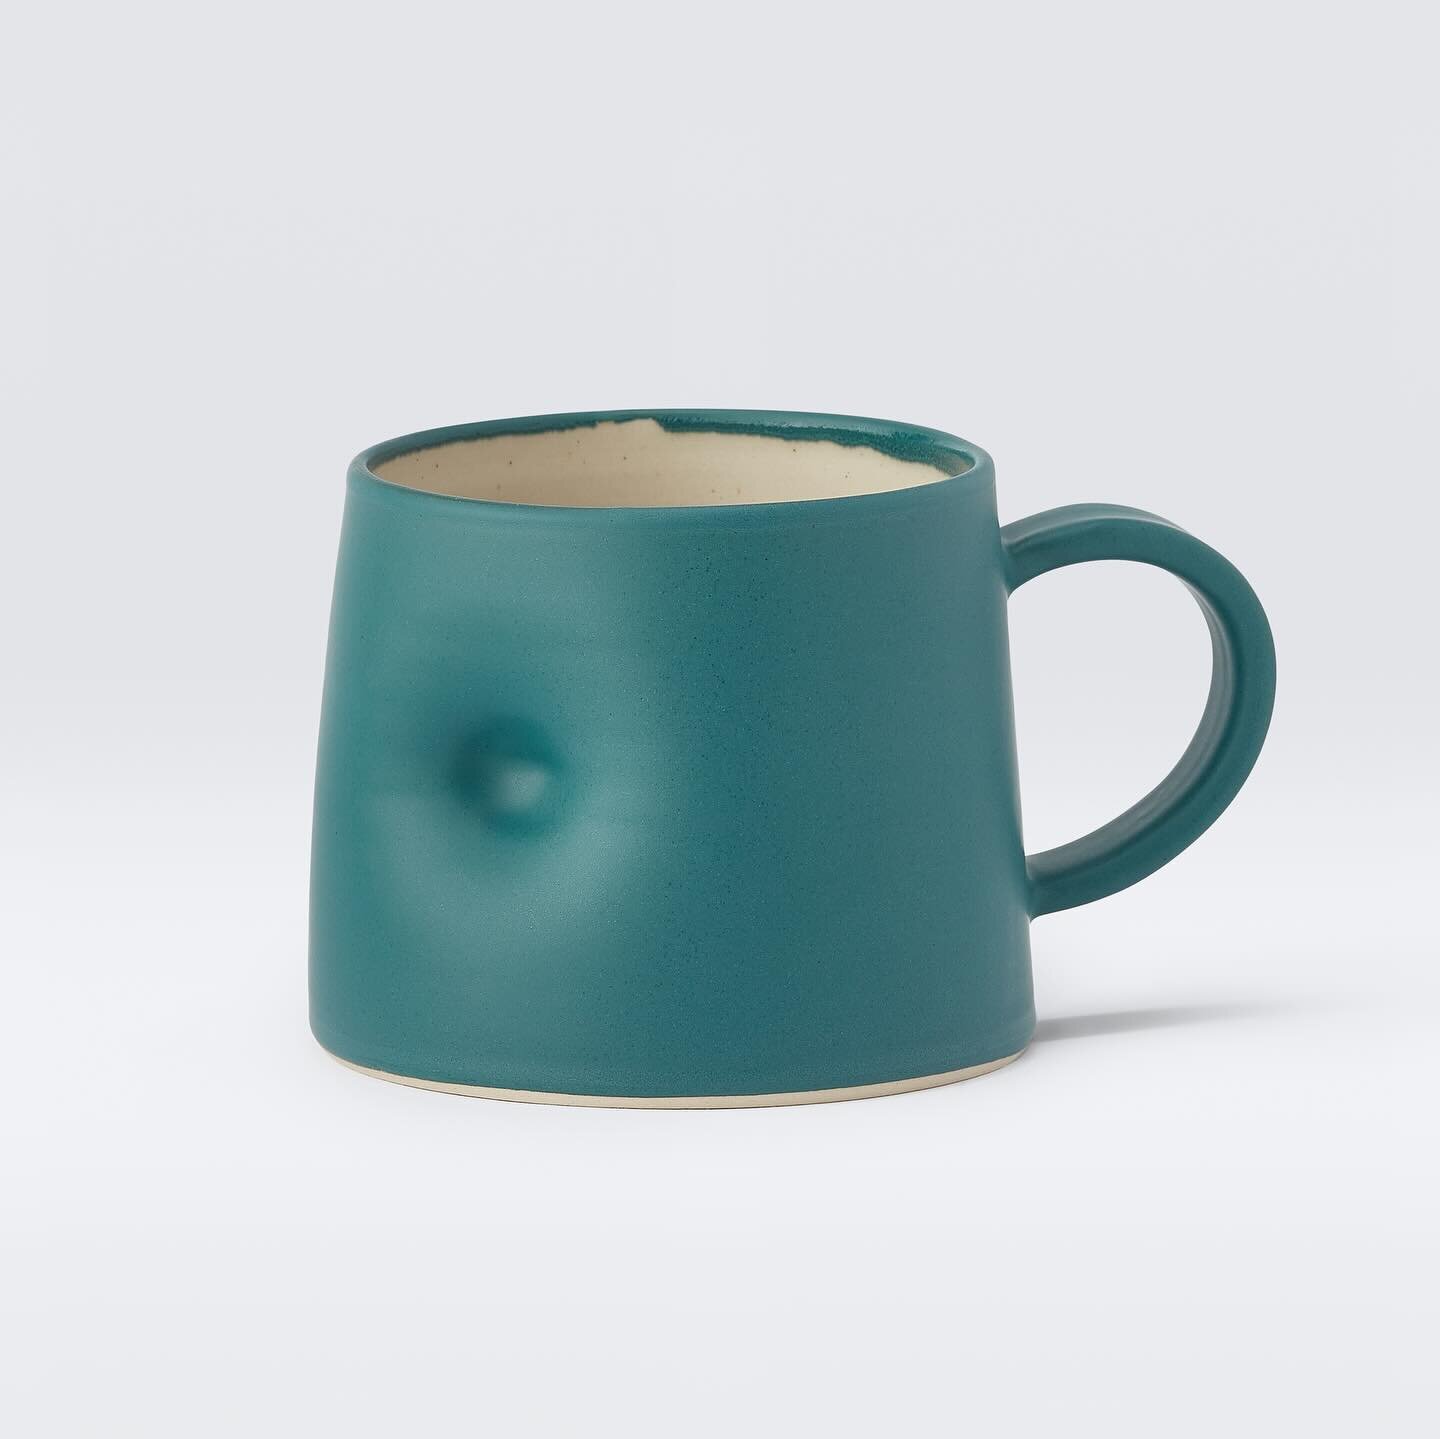 Last day to catch the New Members exhibition at @ceramicscentre in London tomorrow. Such a privilege to have work in this! I popped in today to drop off a few more short cups in Ivy and Teal as these have gone down very well! The short cup is my favo